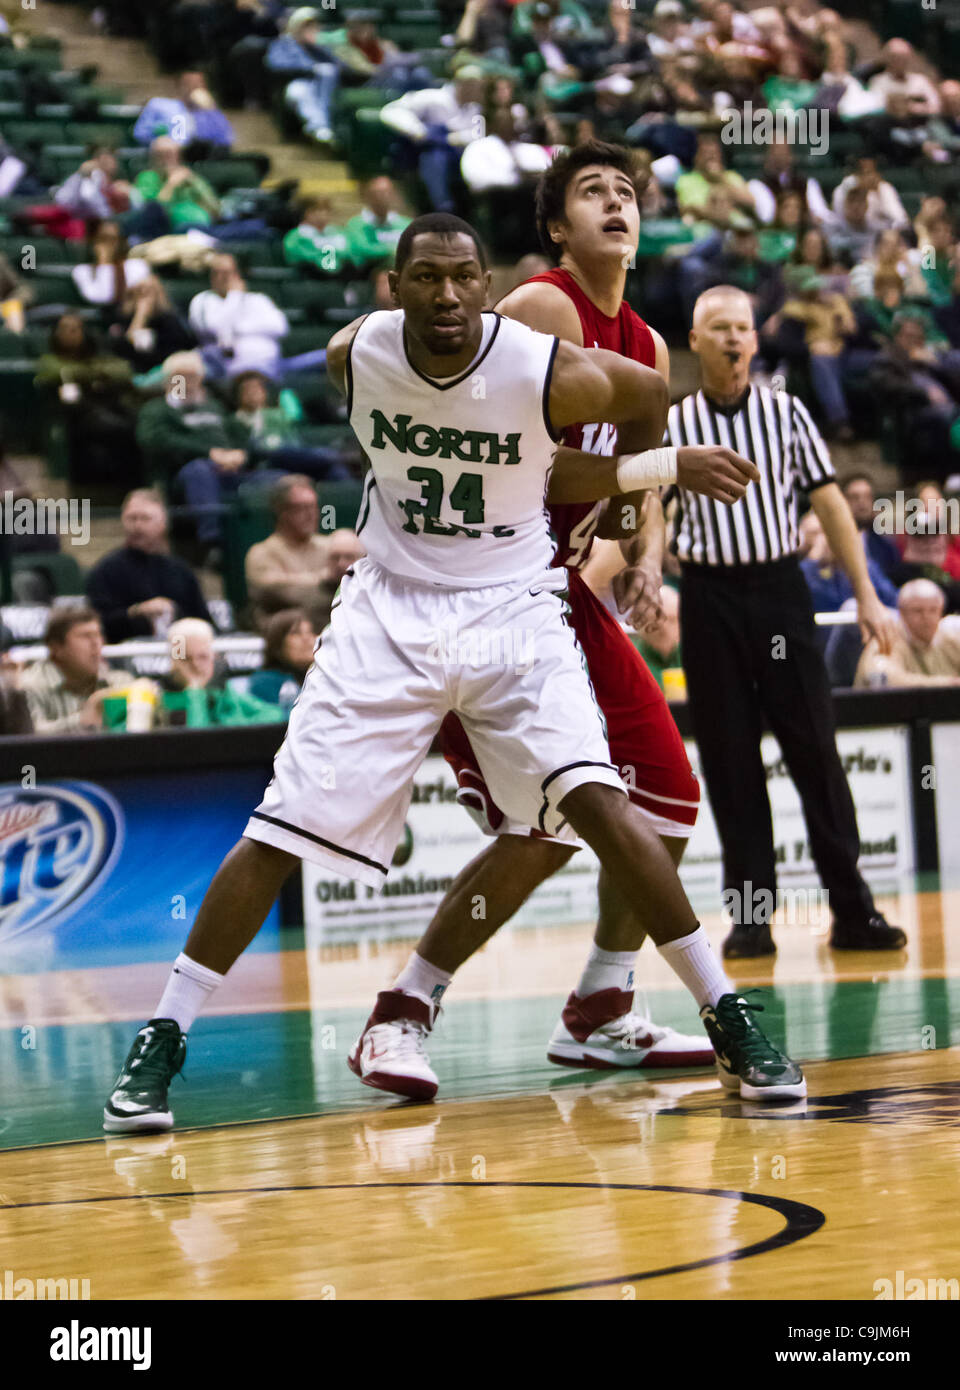 Jan. 12, 2012 - Denton, Texas, United States of America - North Texas Mean Green forward Alonzo Edwards (34) in action during the game between the Western Kentucky Hilltoppers and the University of North Texas Mean Green at the North Texas Coliseum,the Super Pit, in Denton, Texas. UNT defeated Weste Stock Photo